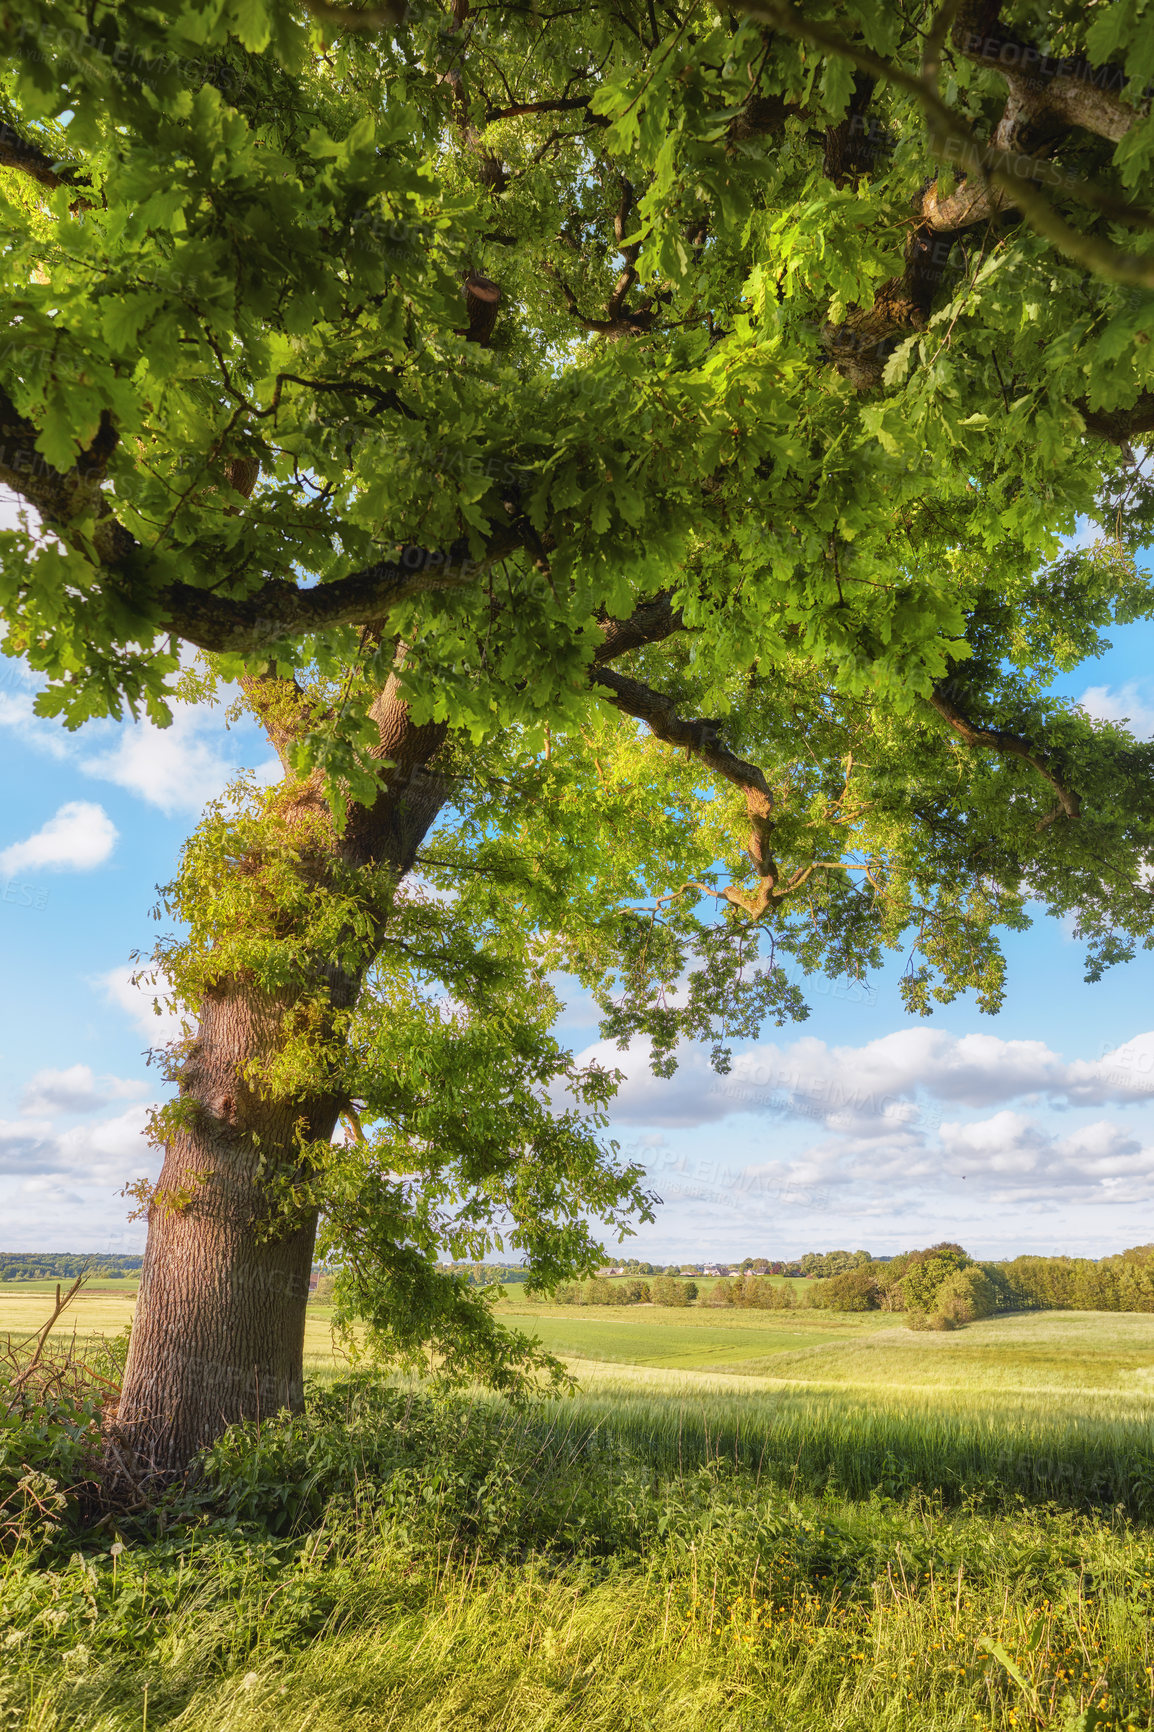 Buy stock photo A tall majestic oak tree growing on an agricultural field or farm. Hardwood forest uncultivated on a lush green field in Denmark. A sunny day during spring in an ecological organic countryside